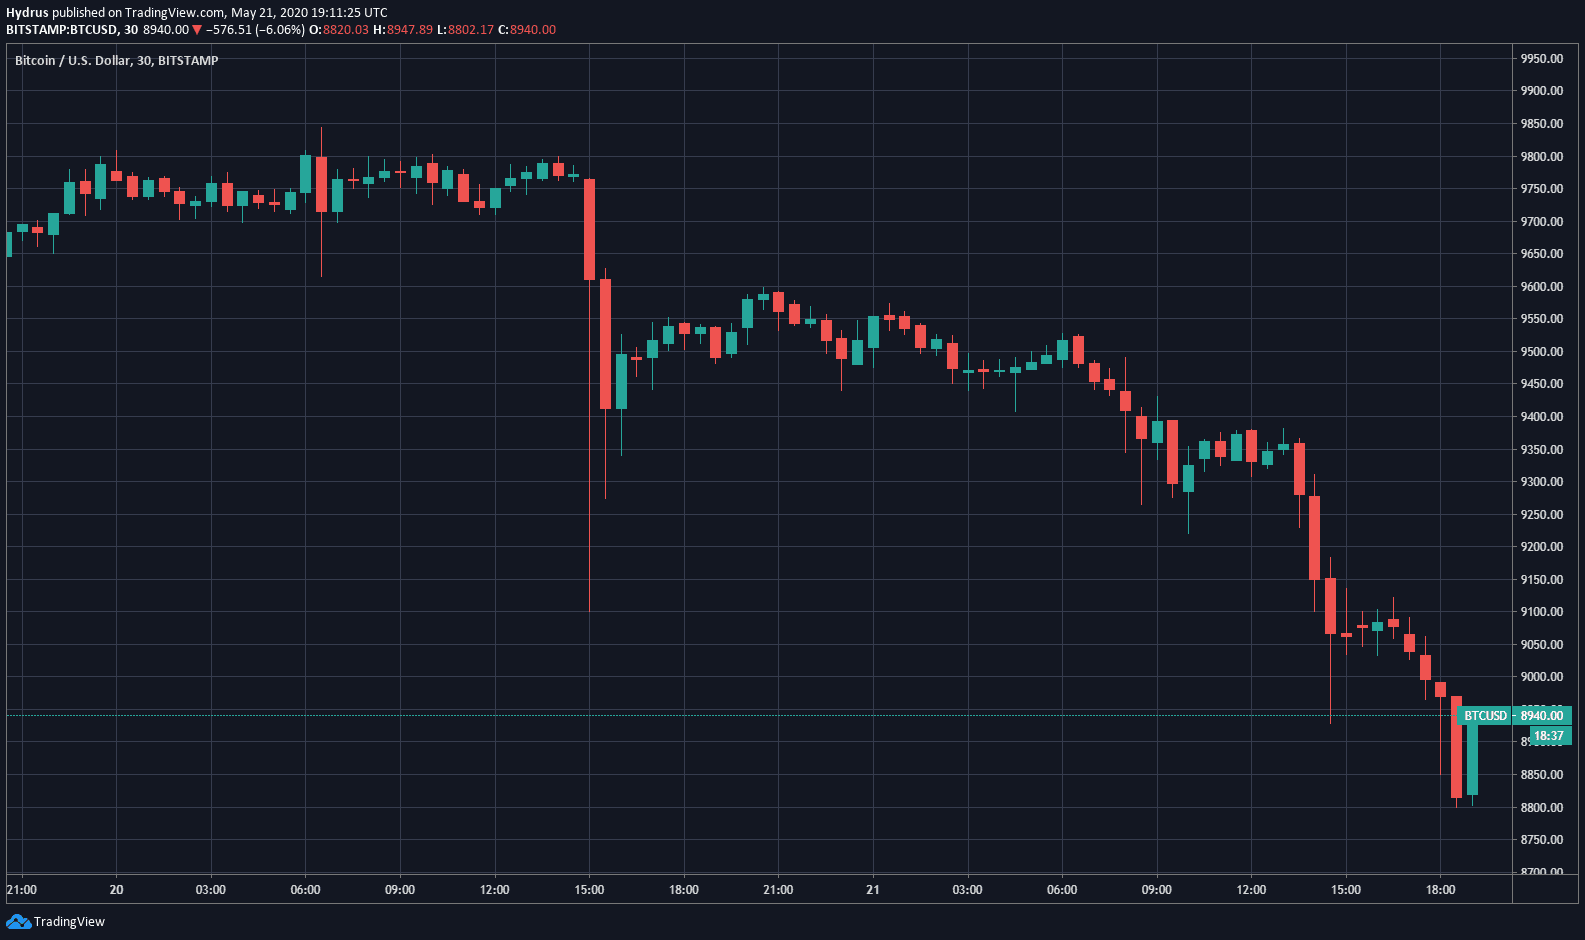 Bitcoin price chart from TradingView.com